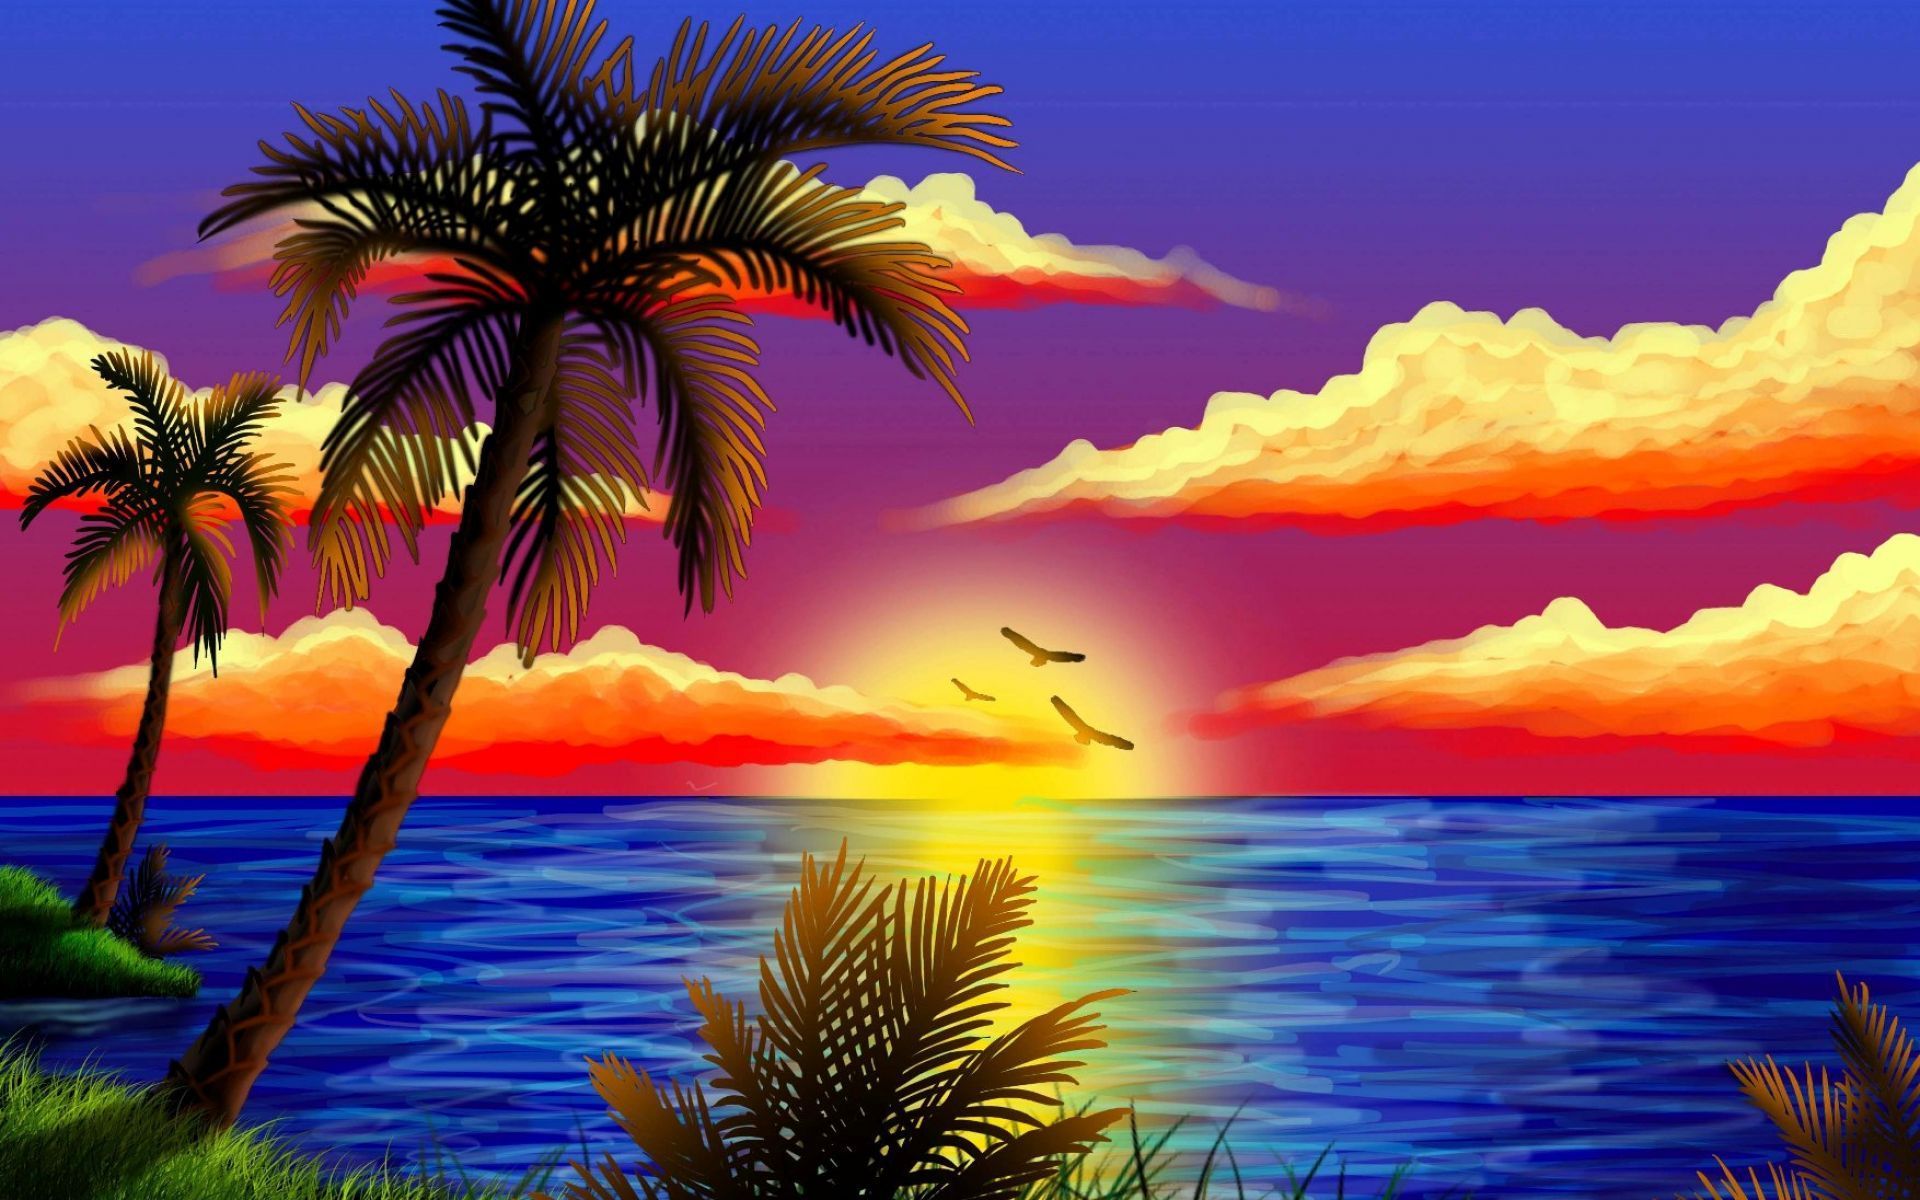 Nature Painting Wallpaper Walllpapers. Nature paintings, Sunset painting, Painting wallpaper